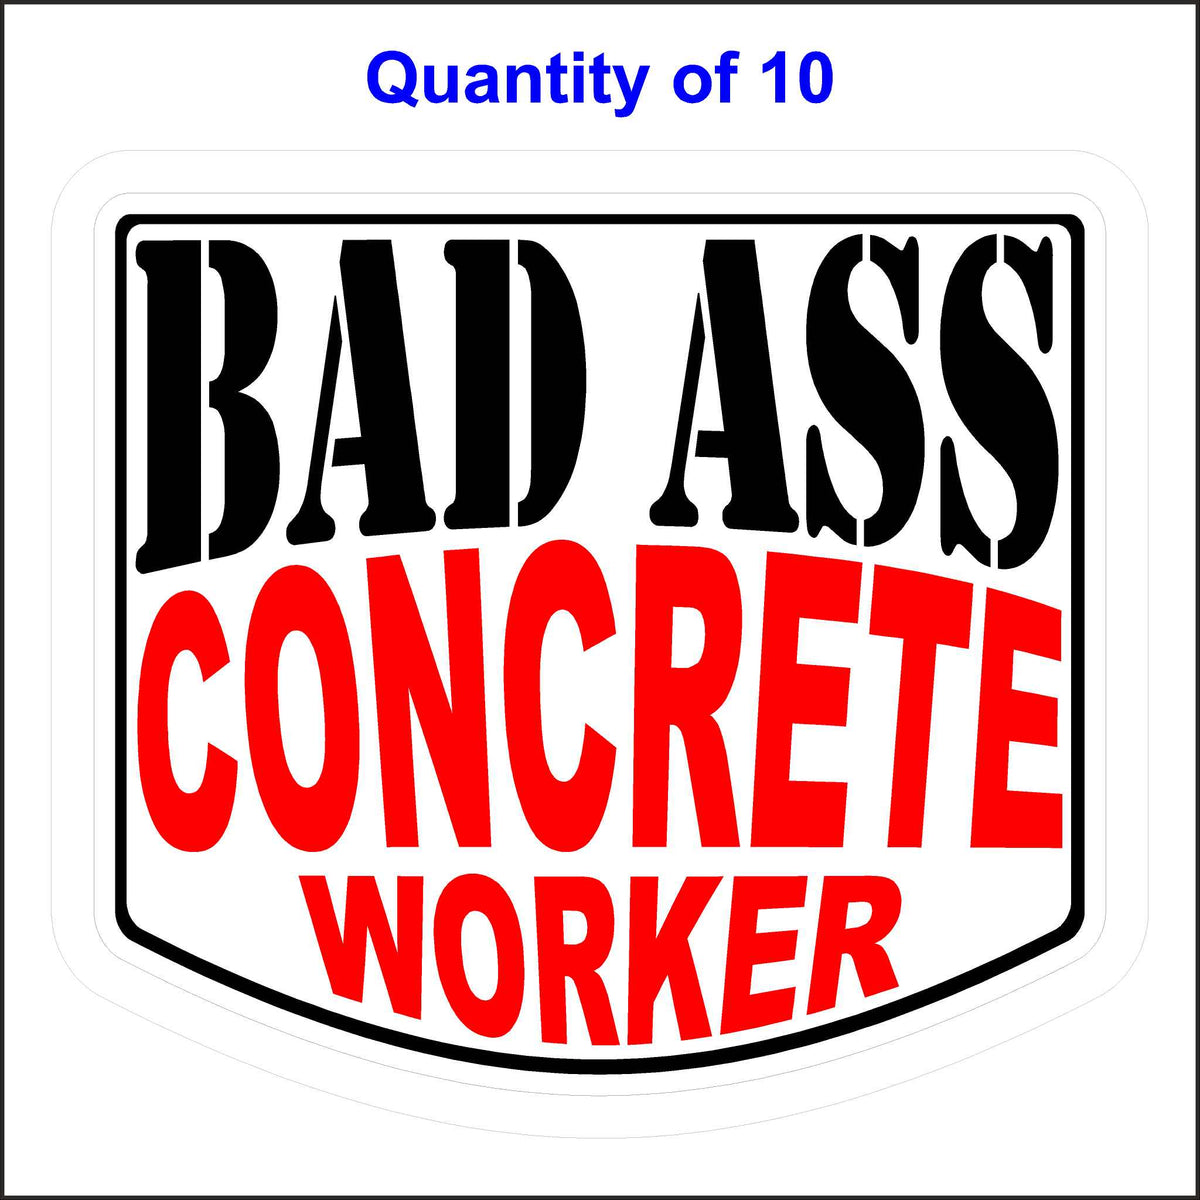 Bad Ass Concrete Worker Stickers 10 Quantity.